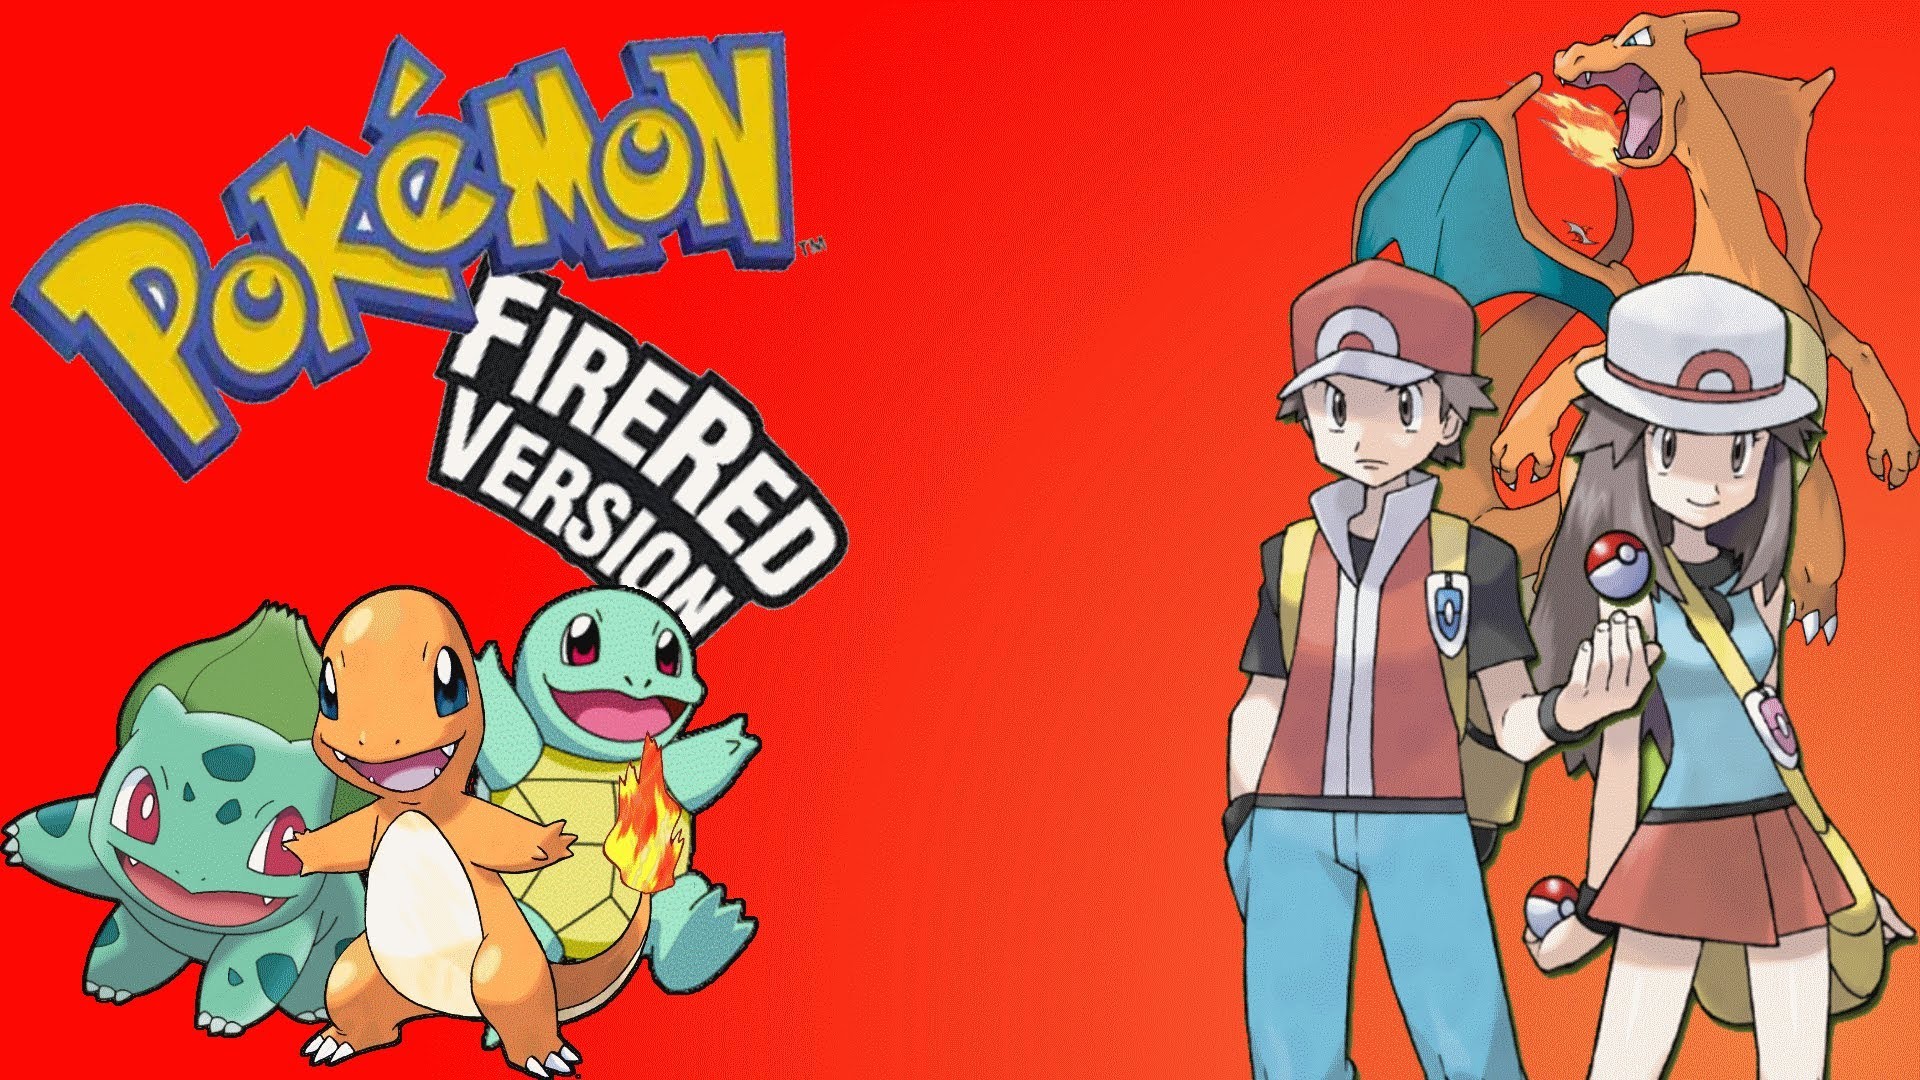 1920x1080 Displaying 17> Images For - Pokemon Fire Red Wallpaper.